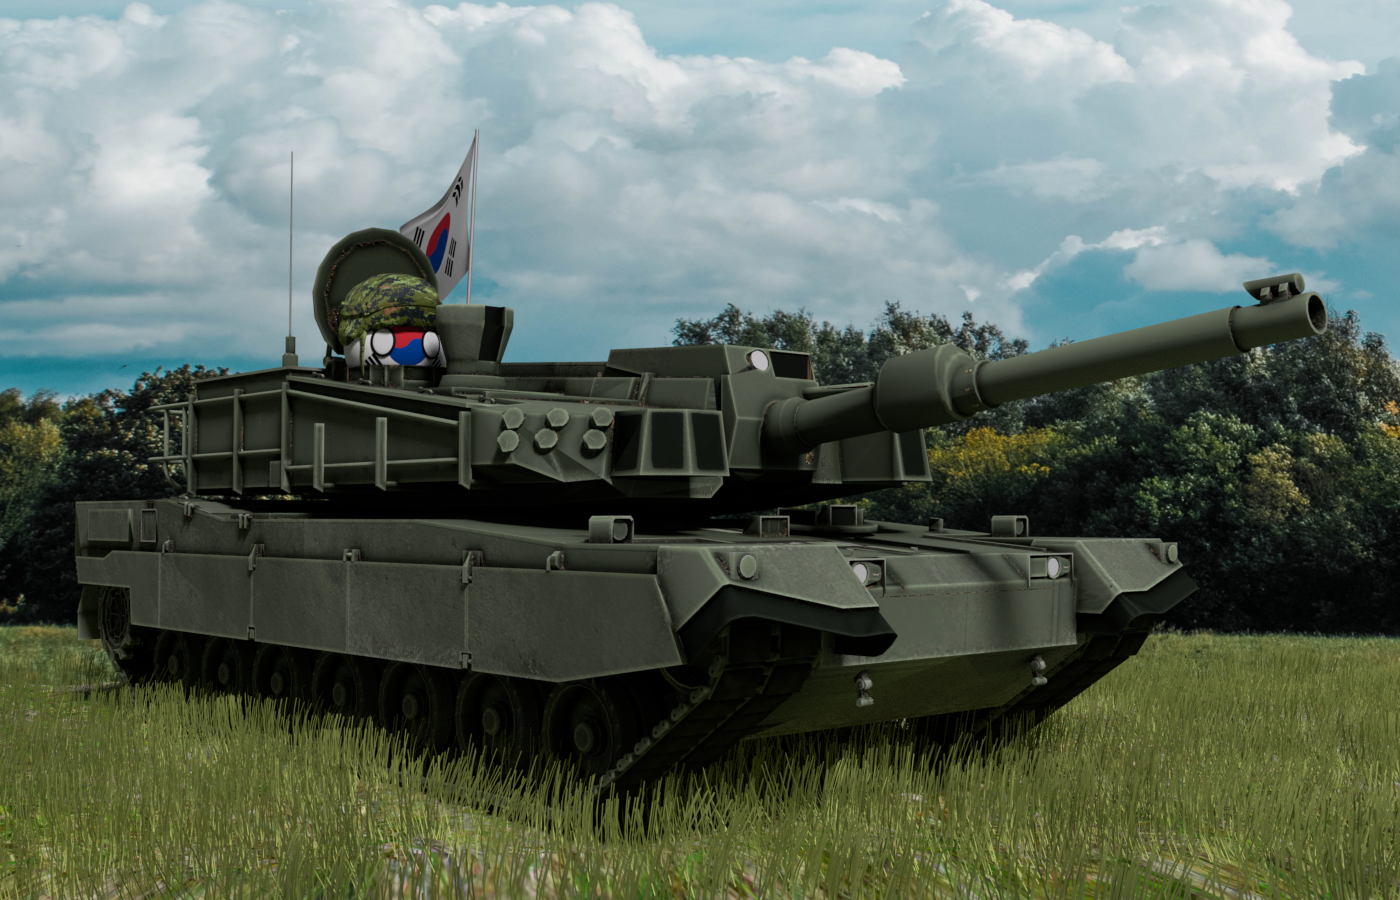 File:K2 Black Panther (15373704976) (cropped).jpg - Wikimedia Commons